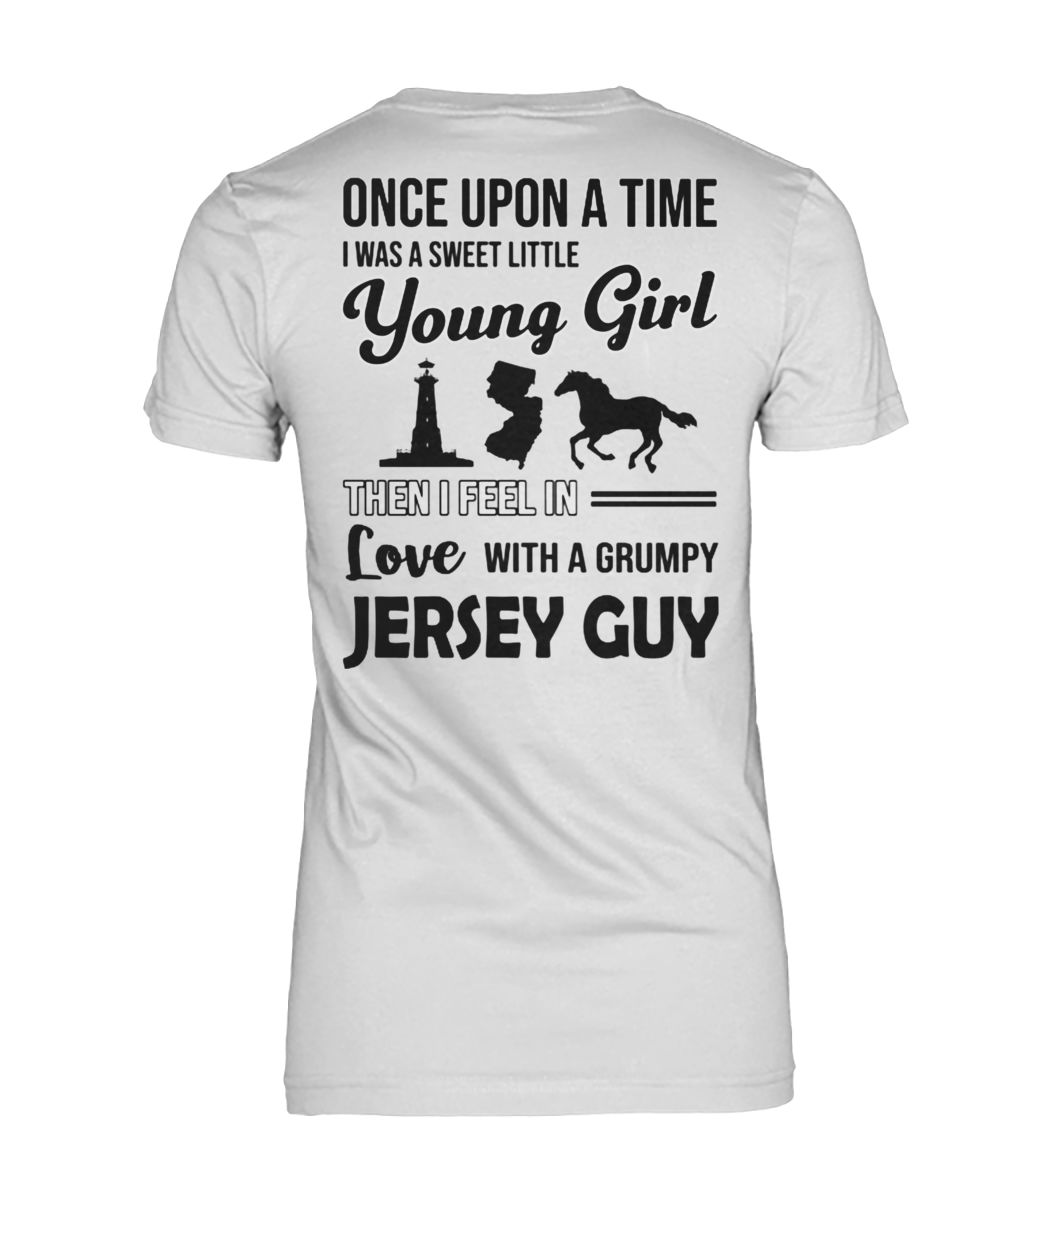 Once upon a time I was a sweet little young girl then I feel in love with a grumpy jersey guy women's crew tee